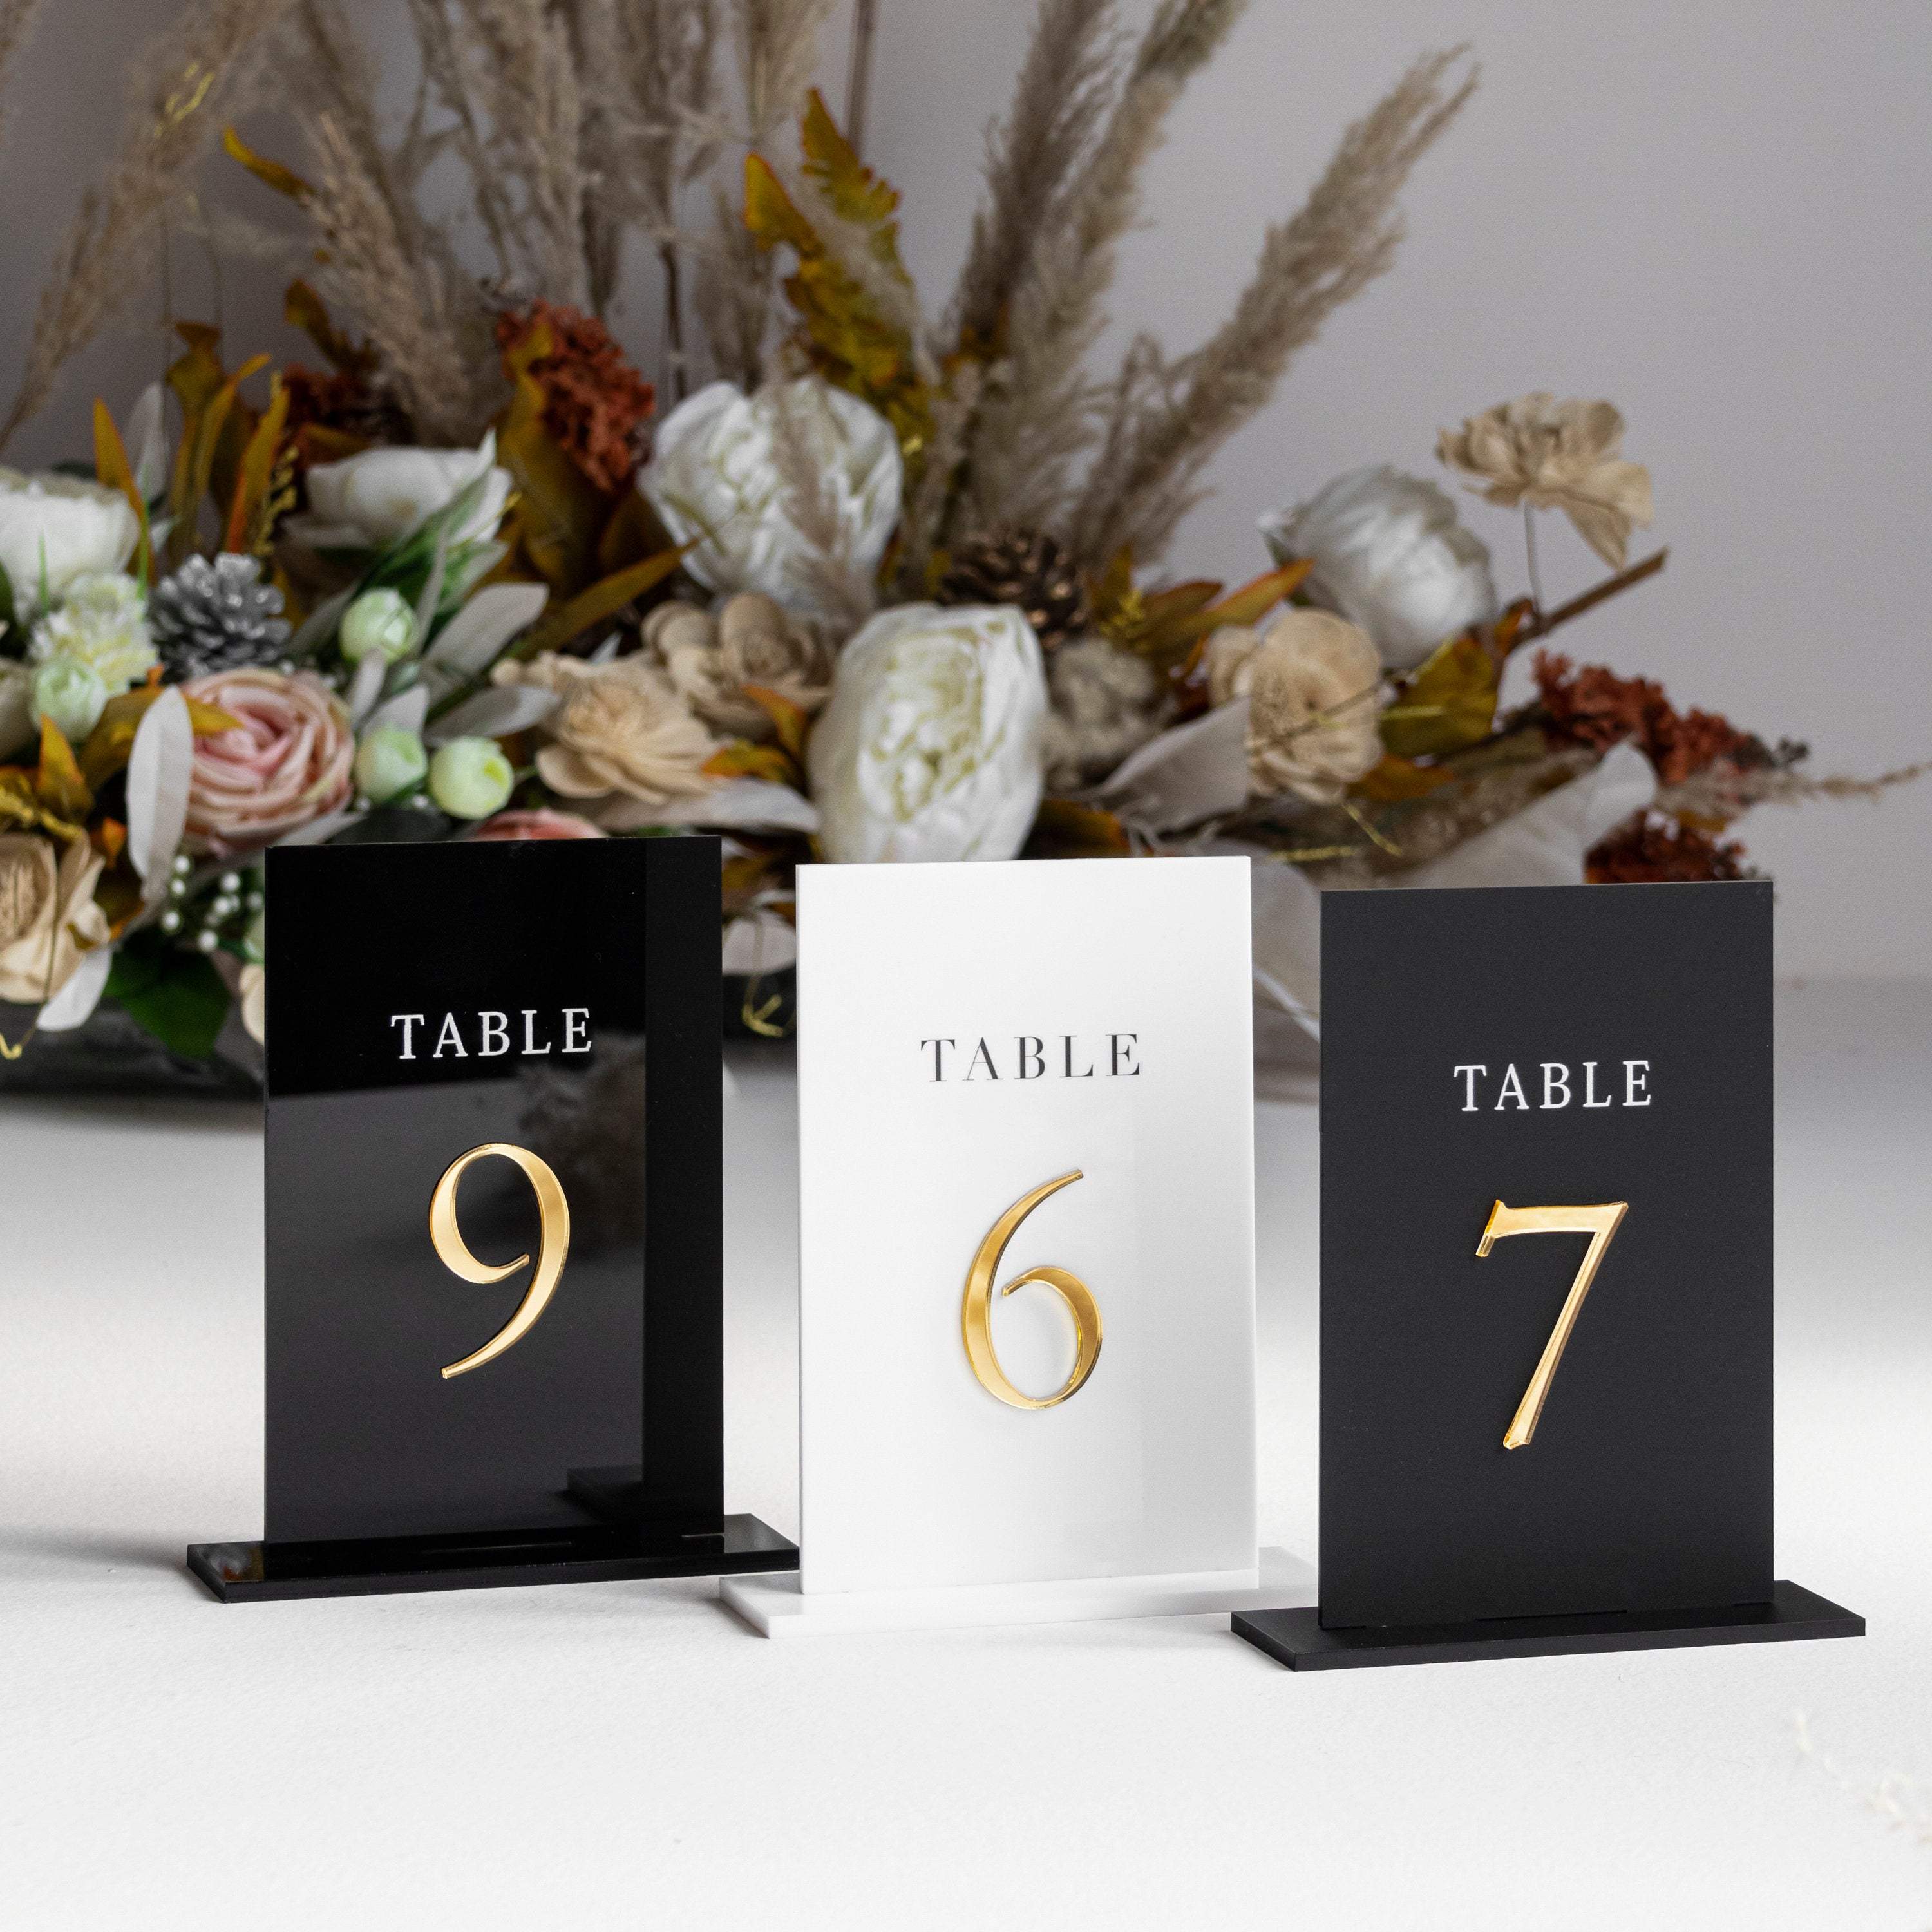 Matt Black Acrylic Table Numbers - Wedding Table Decor - Wedding Signage - Table Signs - Table Numbers - Wedding Stationery - Reception Sign